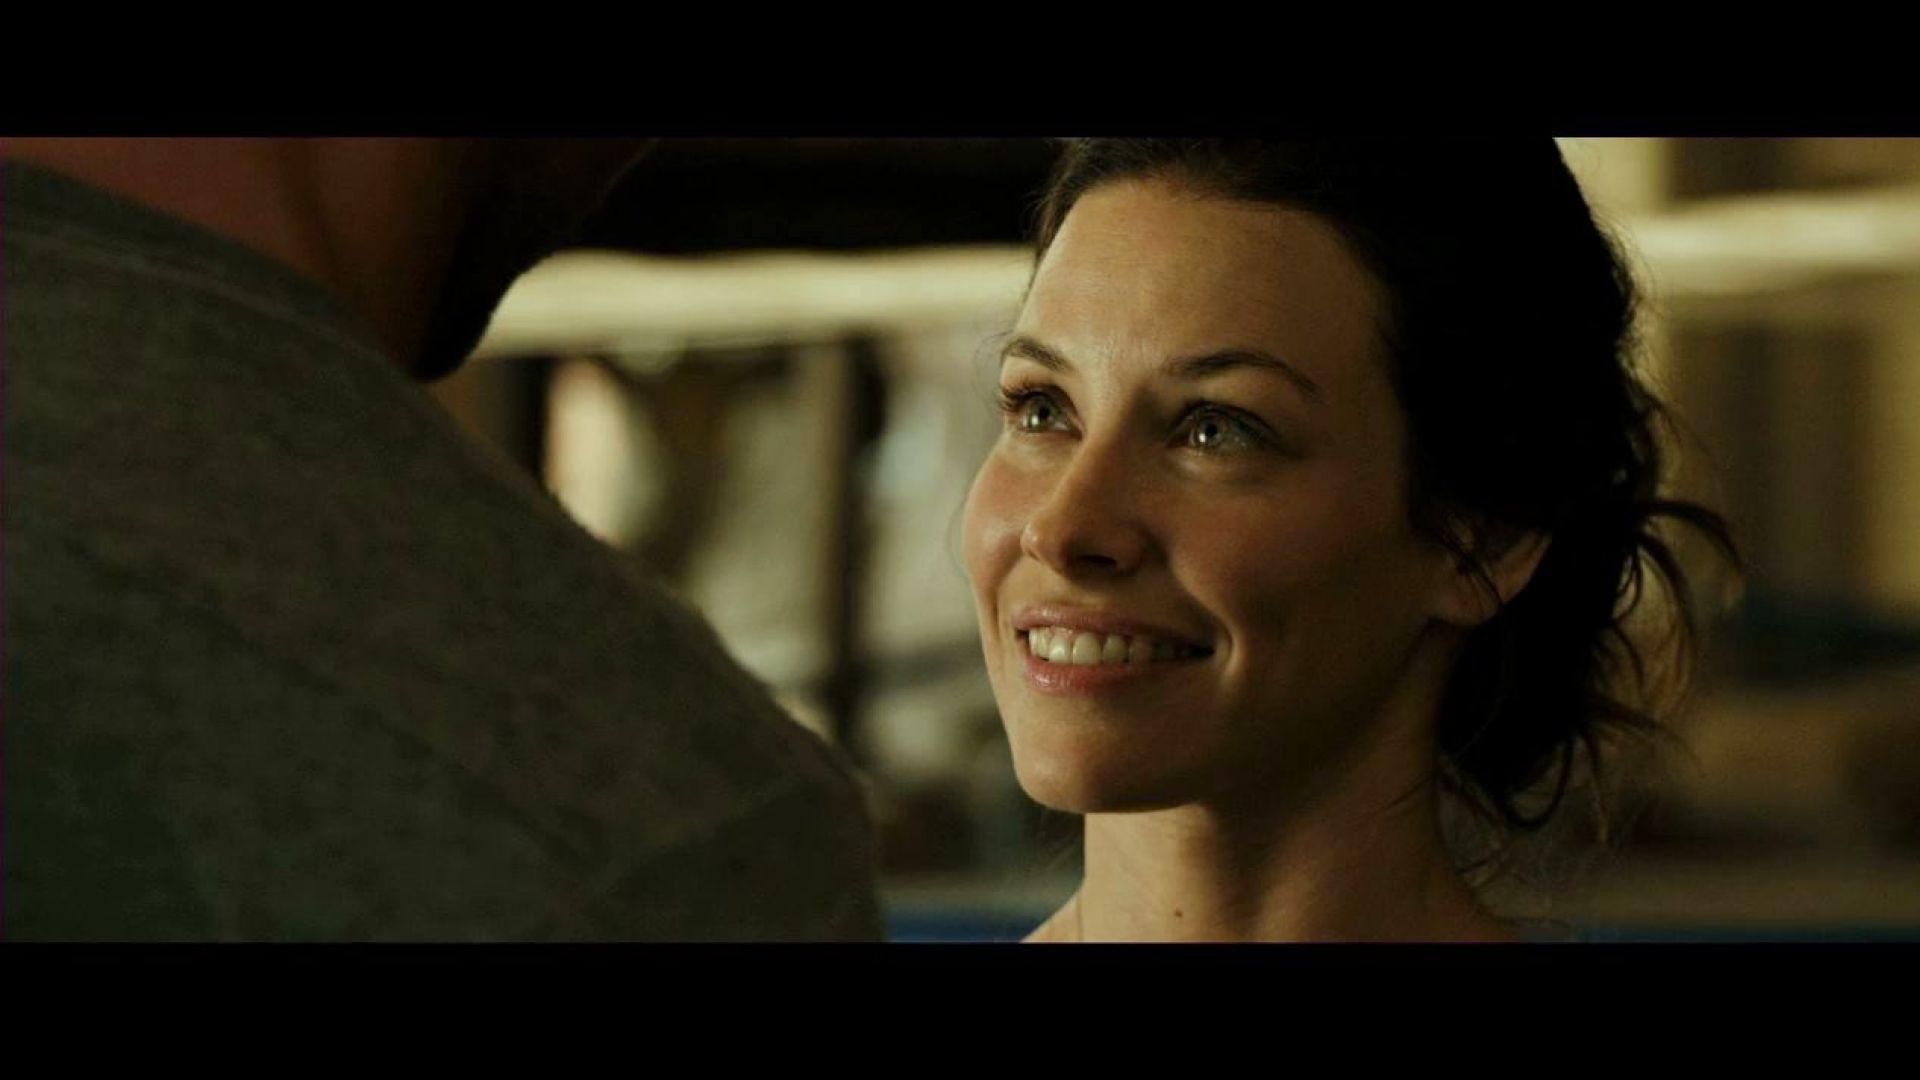 Evangeline Lilly and Hugh Jackman talk about money in Real Steel